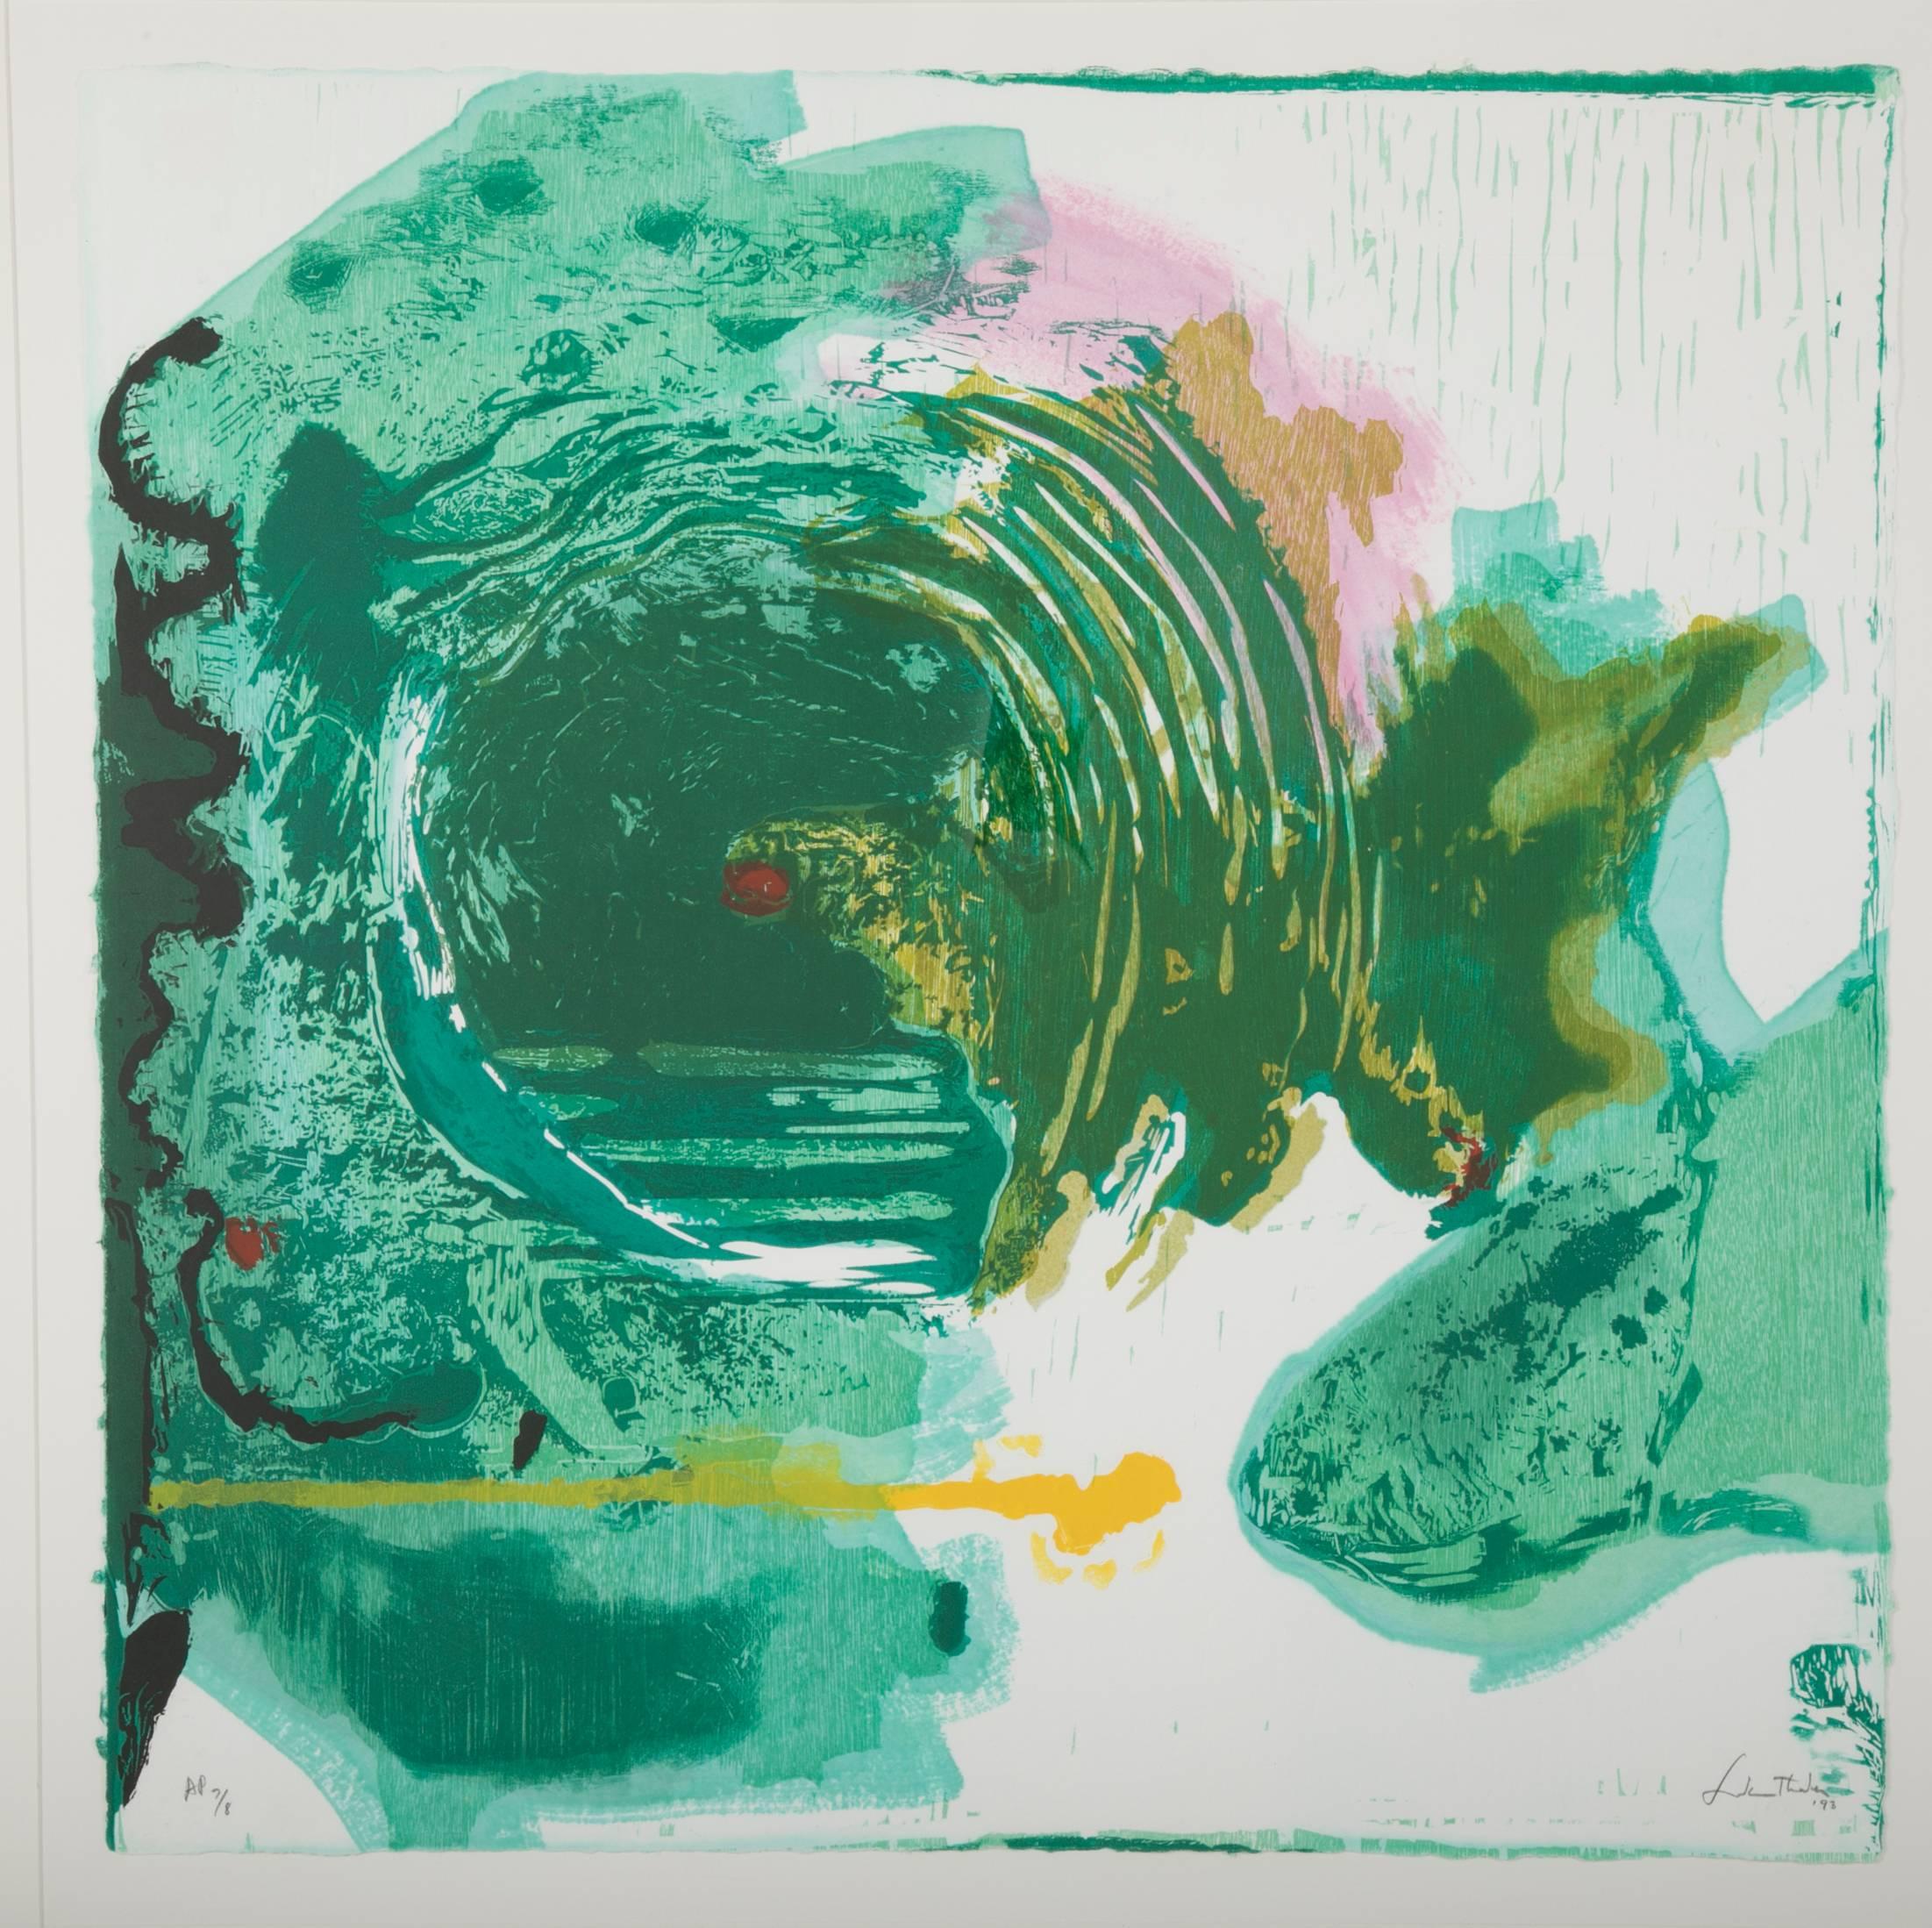 A Woodcut print by Abstract Expressionist artist Helen Frankenthaler, titled Radius, 1992-1993. Printed in nine colors from six wood cut and embossed blocks on hand dyed paper. Artist proof numbered 7/8 in pencil on lower left from the edition of